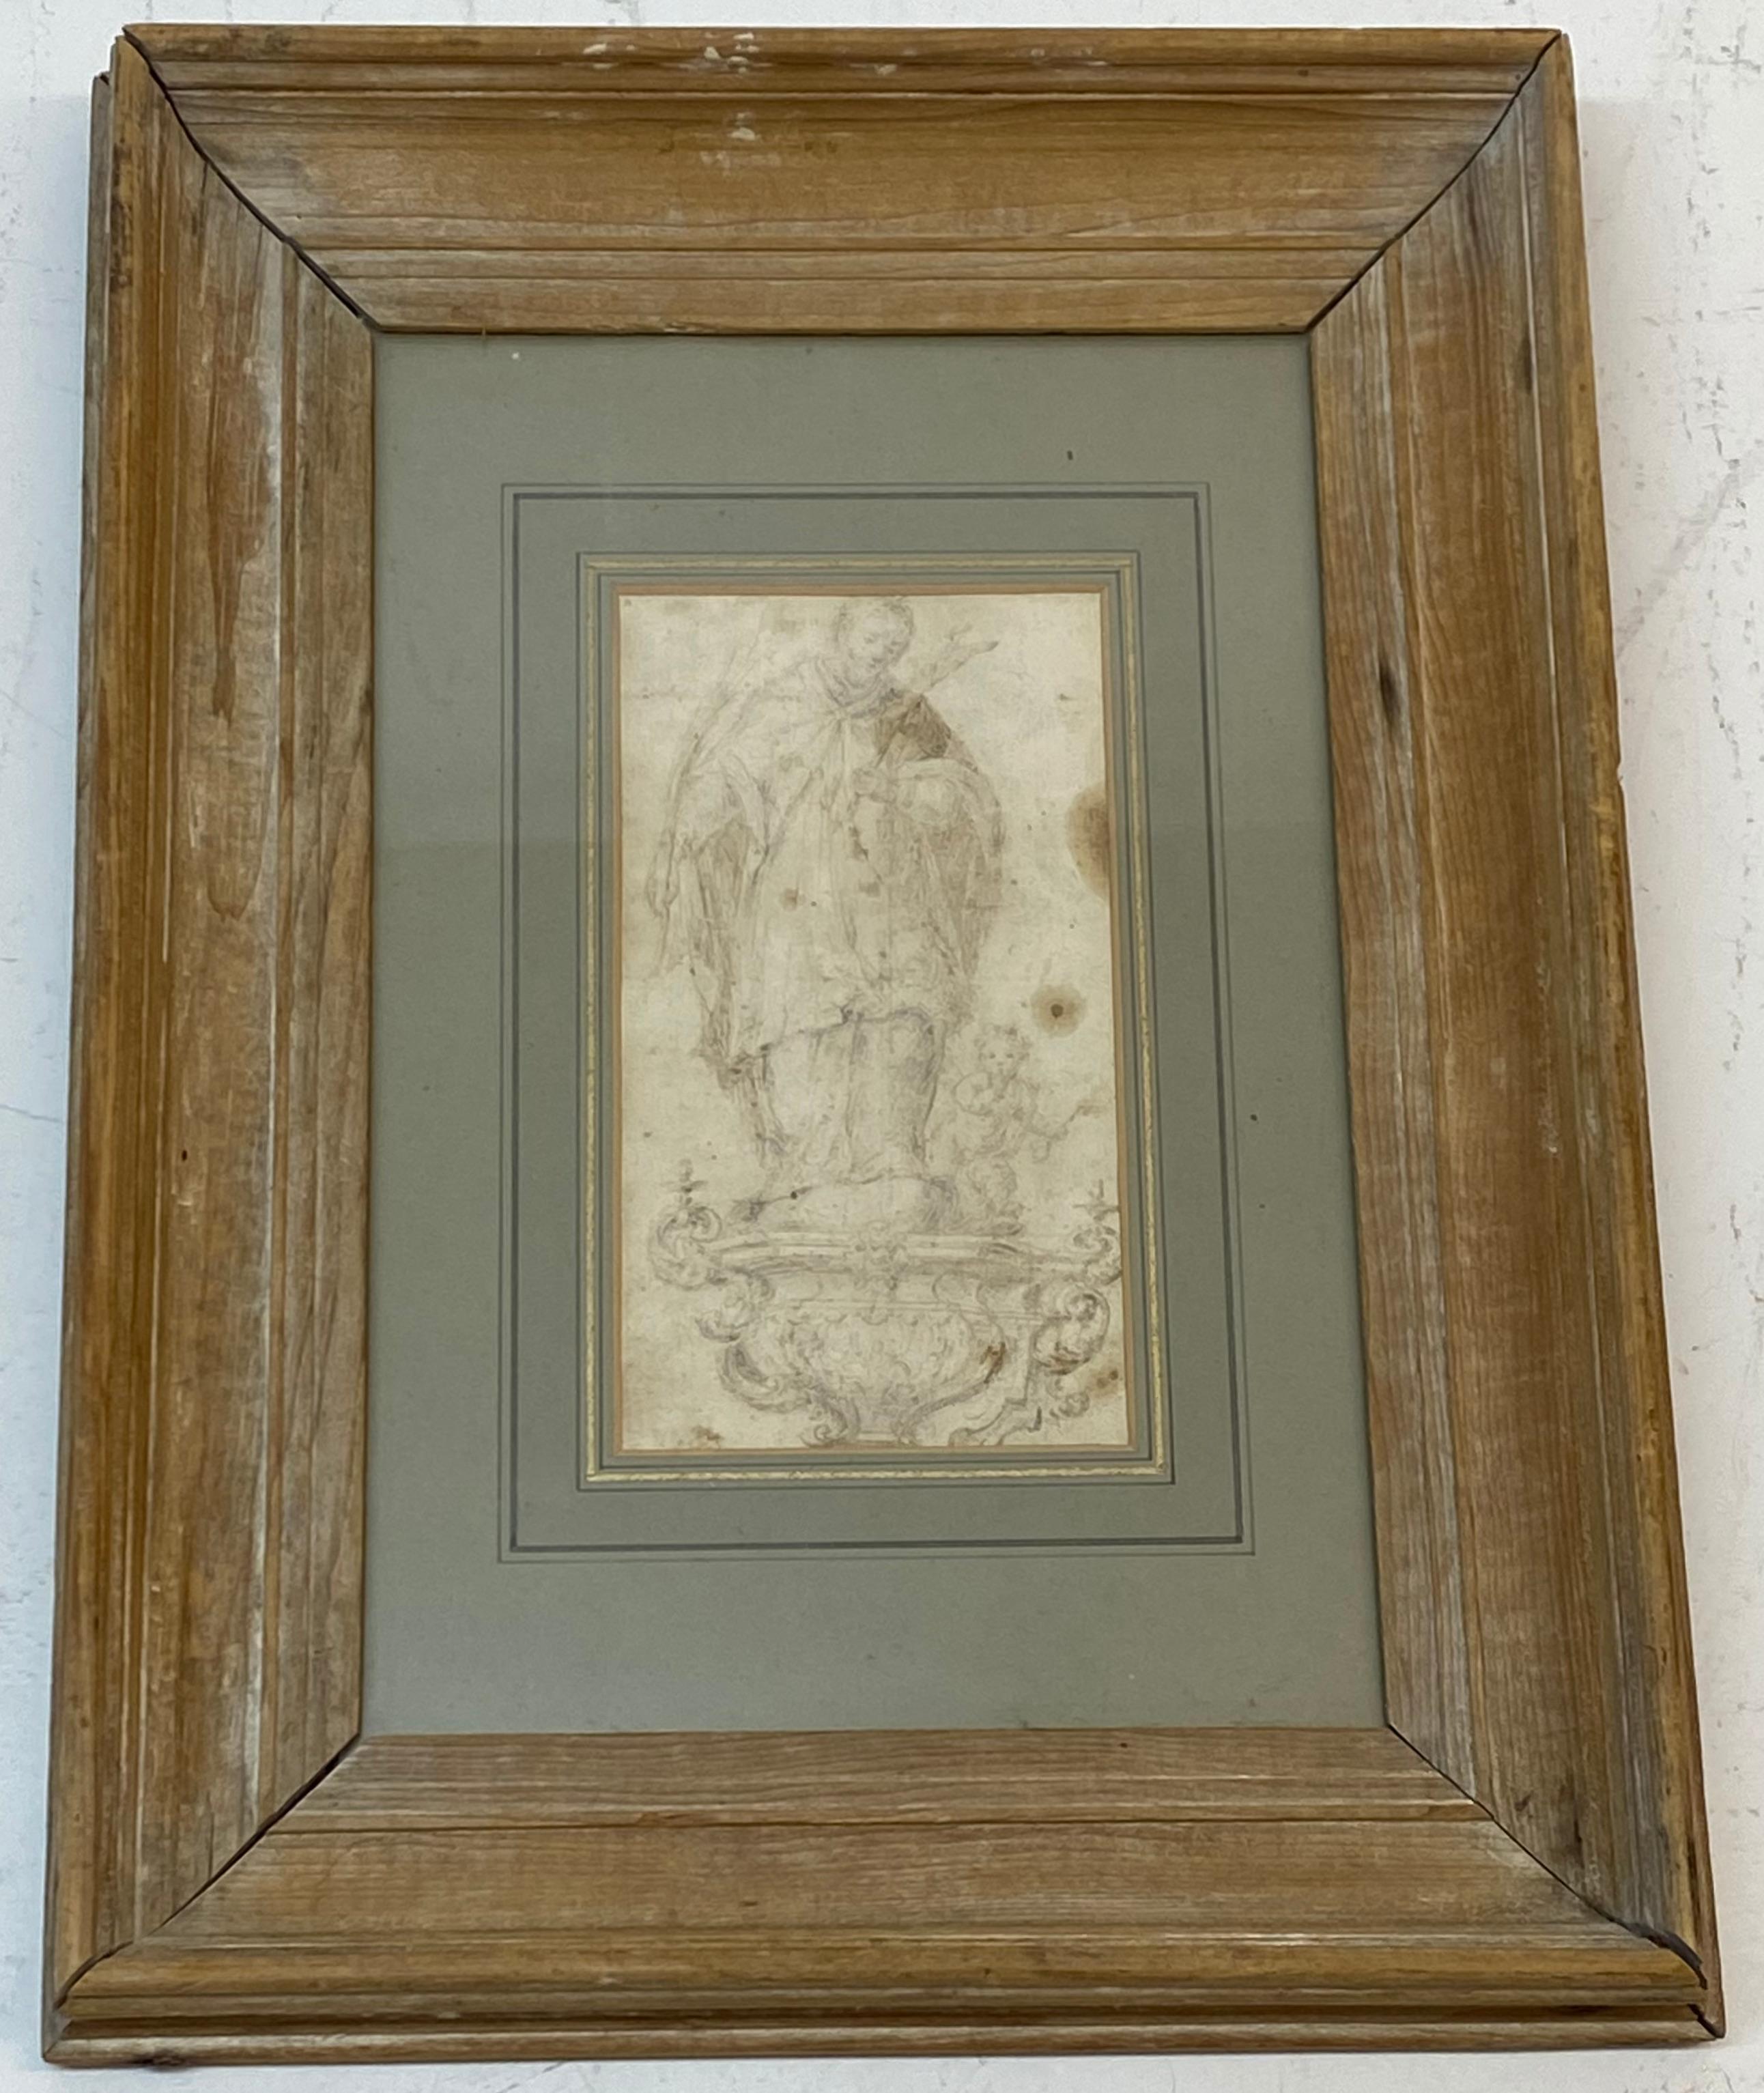 Unknown Figurative Art - 17th Century Old Master Drawing